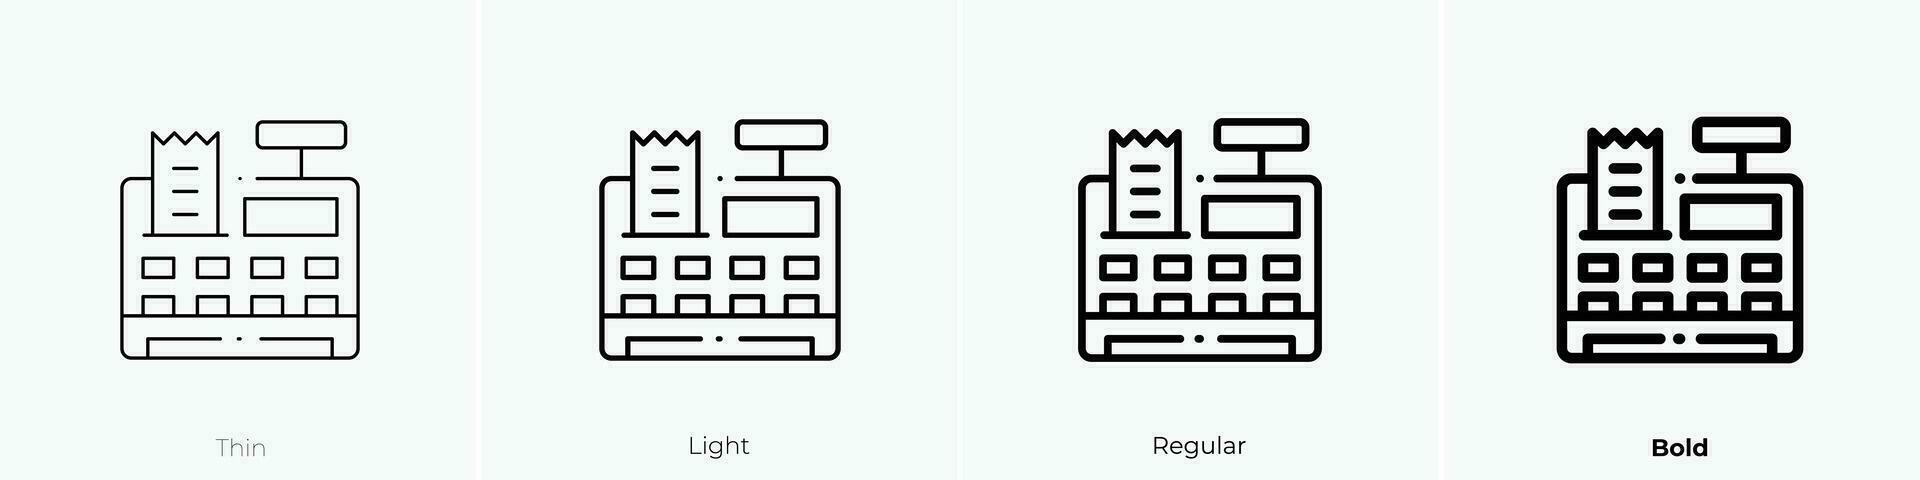 register icon. Thin, Light, Regular And Bold style design isolated on white background vector